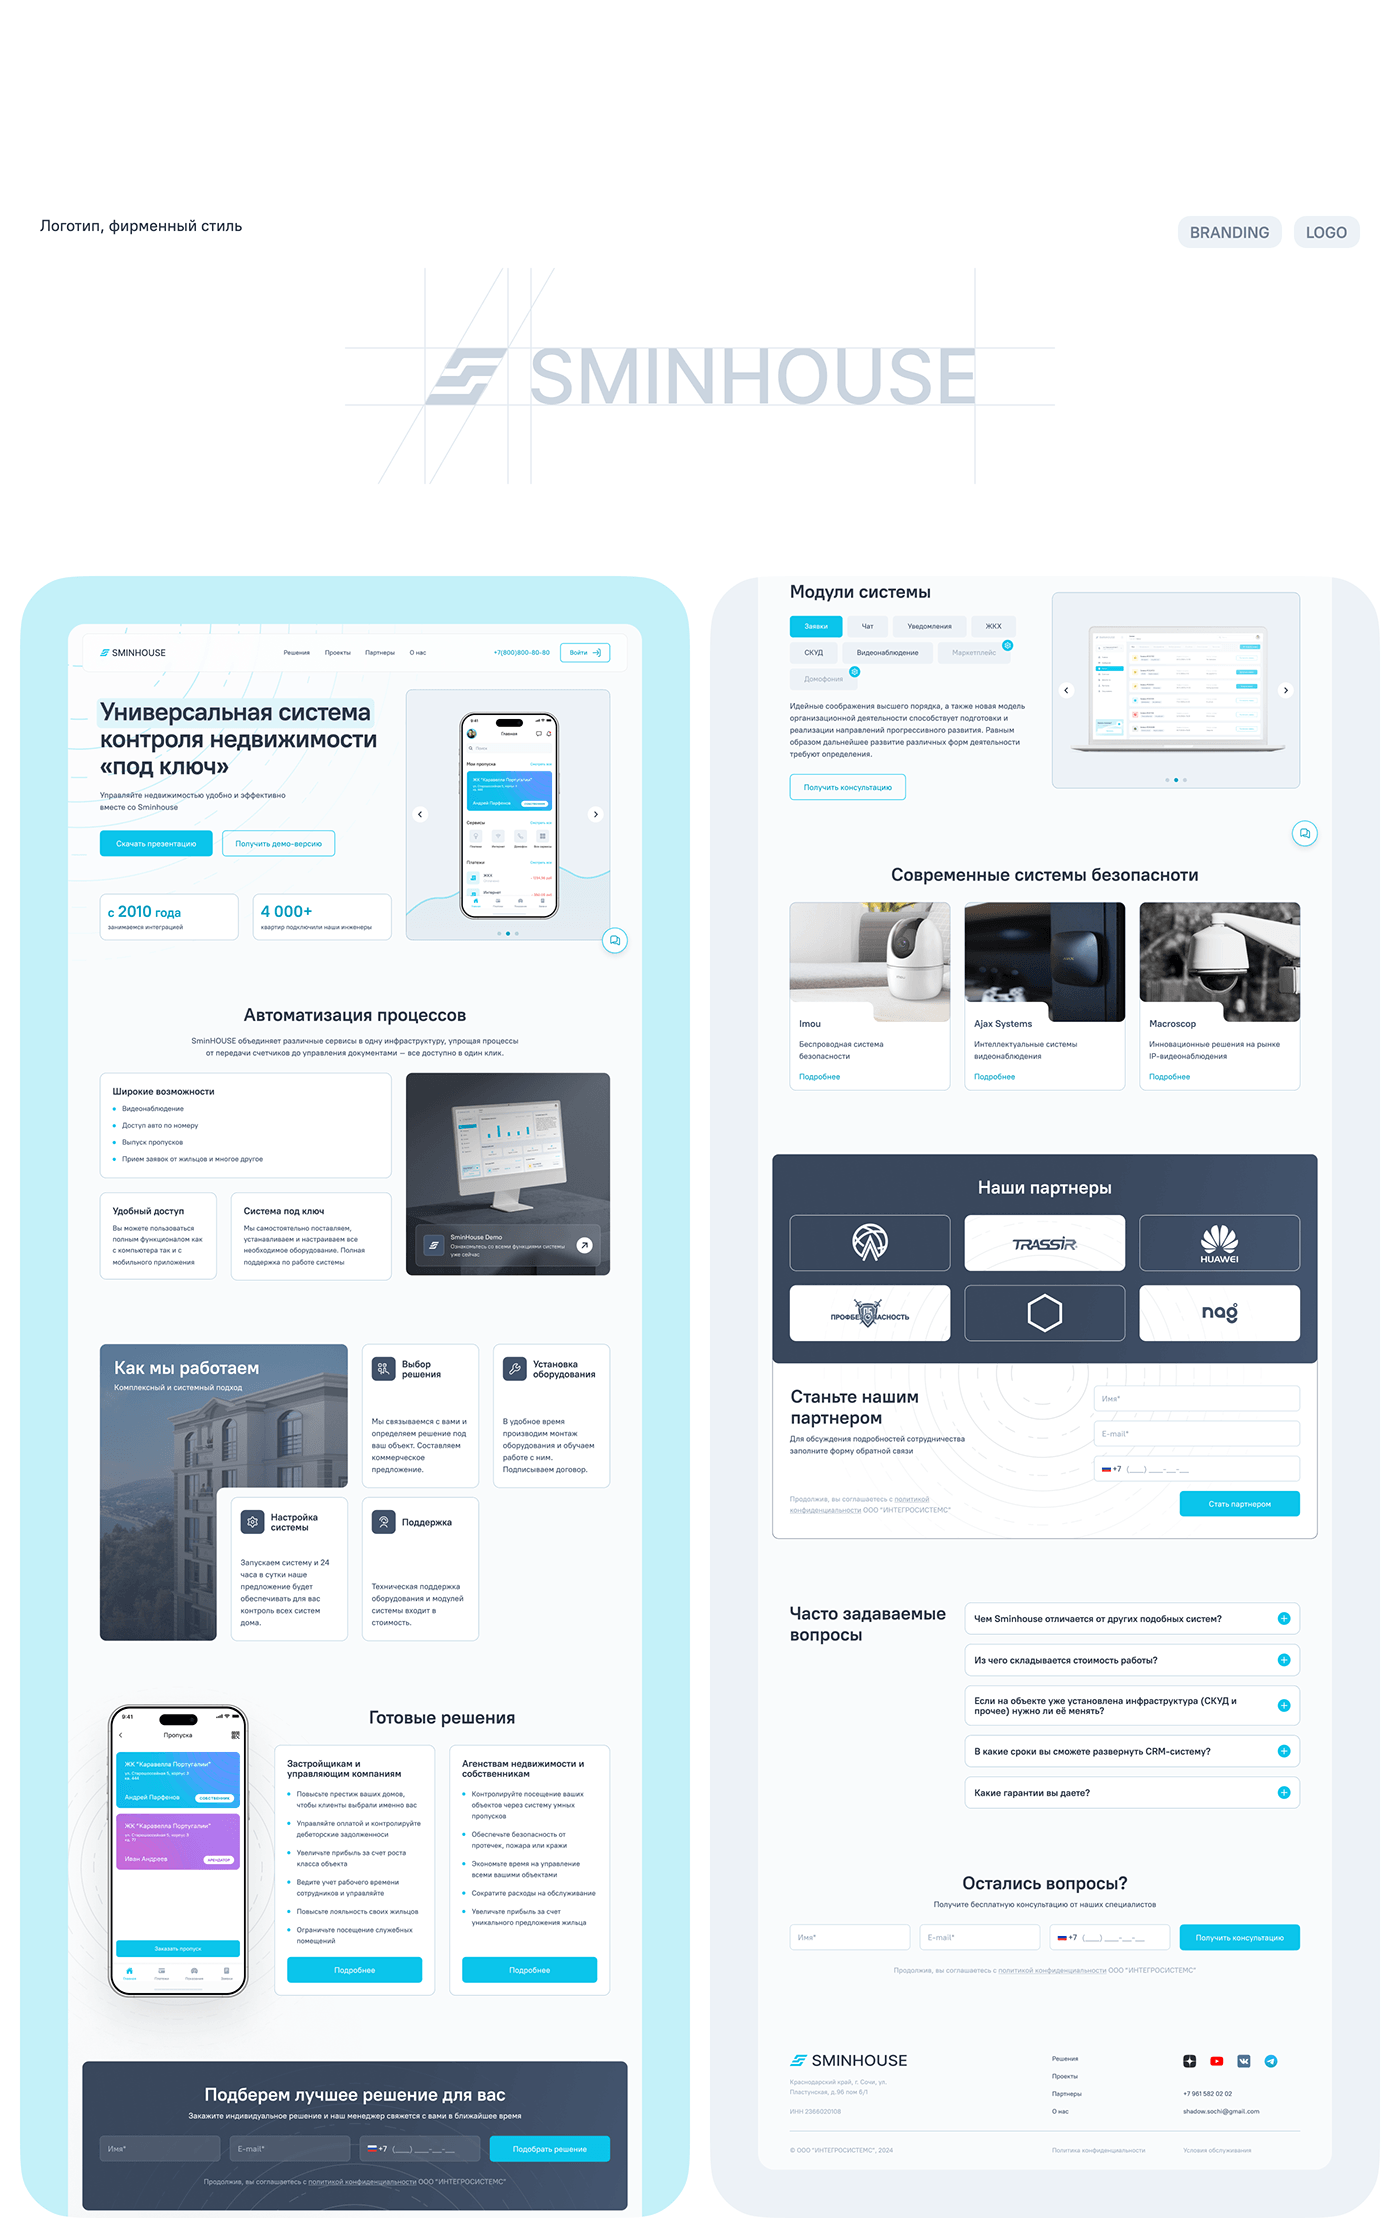 Brand identity for security and smart home tech